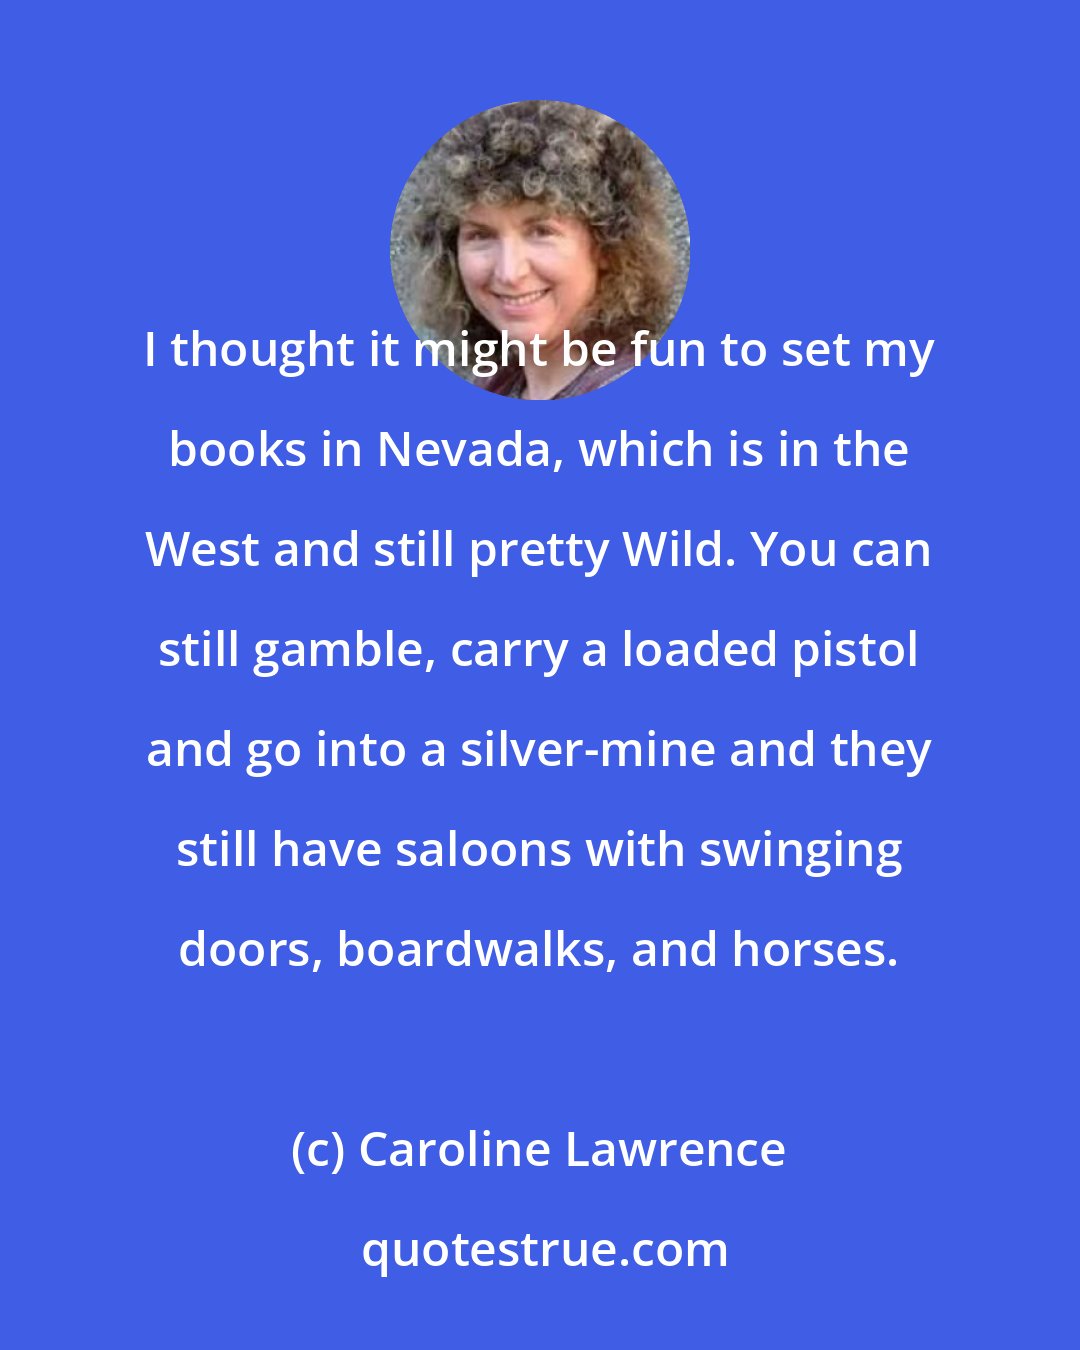 Caroline Lawrence: I thought it might be fun to set my books in Nevada, which is in the West and still pretty Wild. You can still gamble, carry a loaded pistol and go into a silver-mine and they still have saloons with swinging doors, boardwalks, and horses.